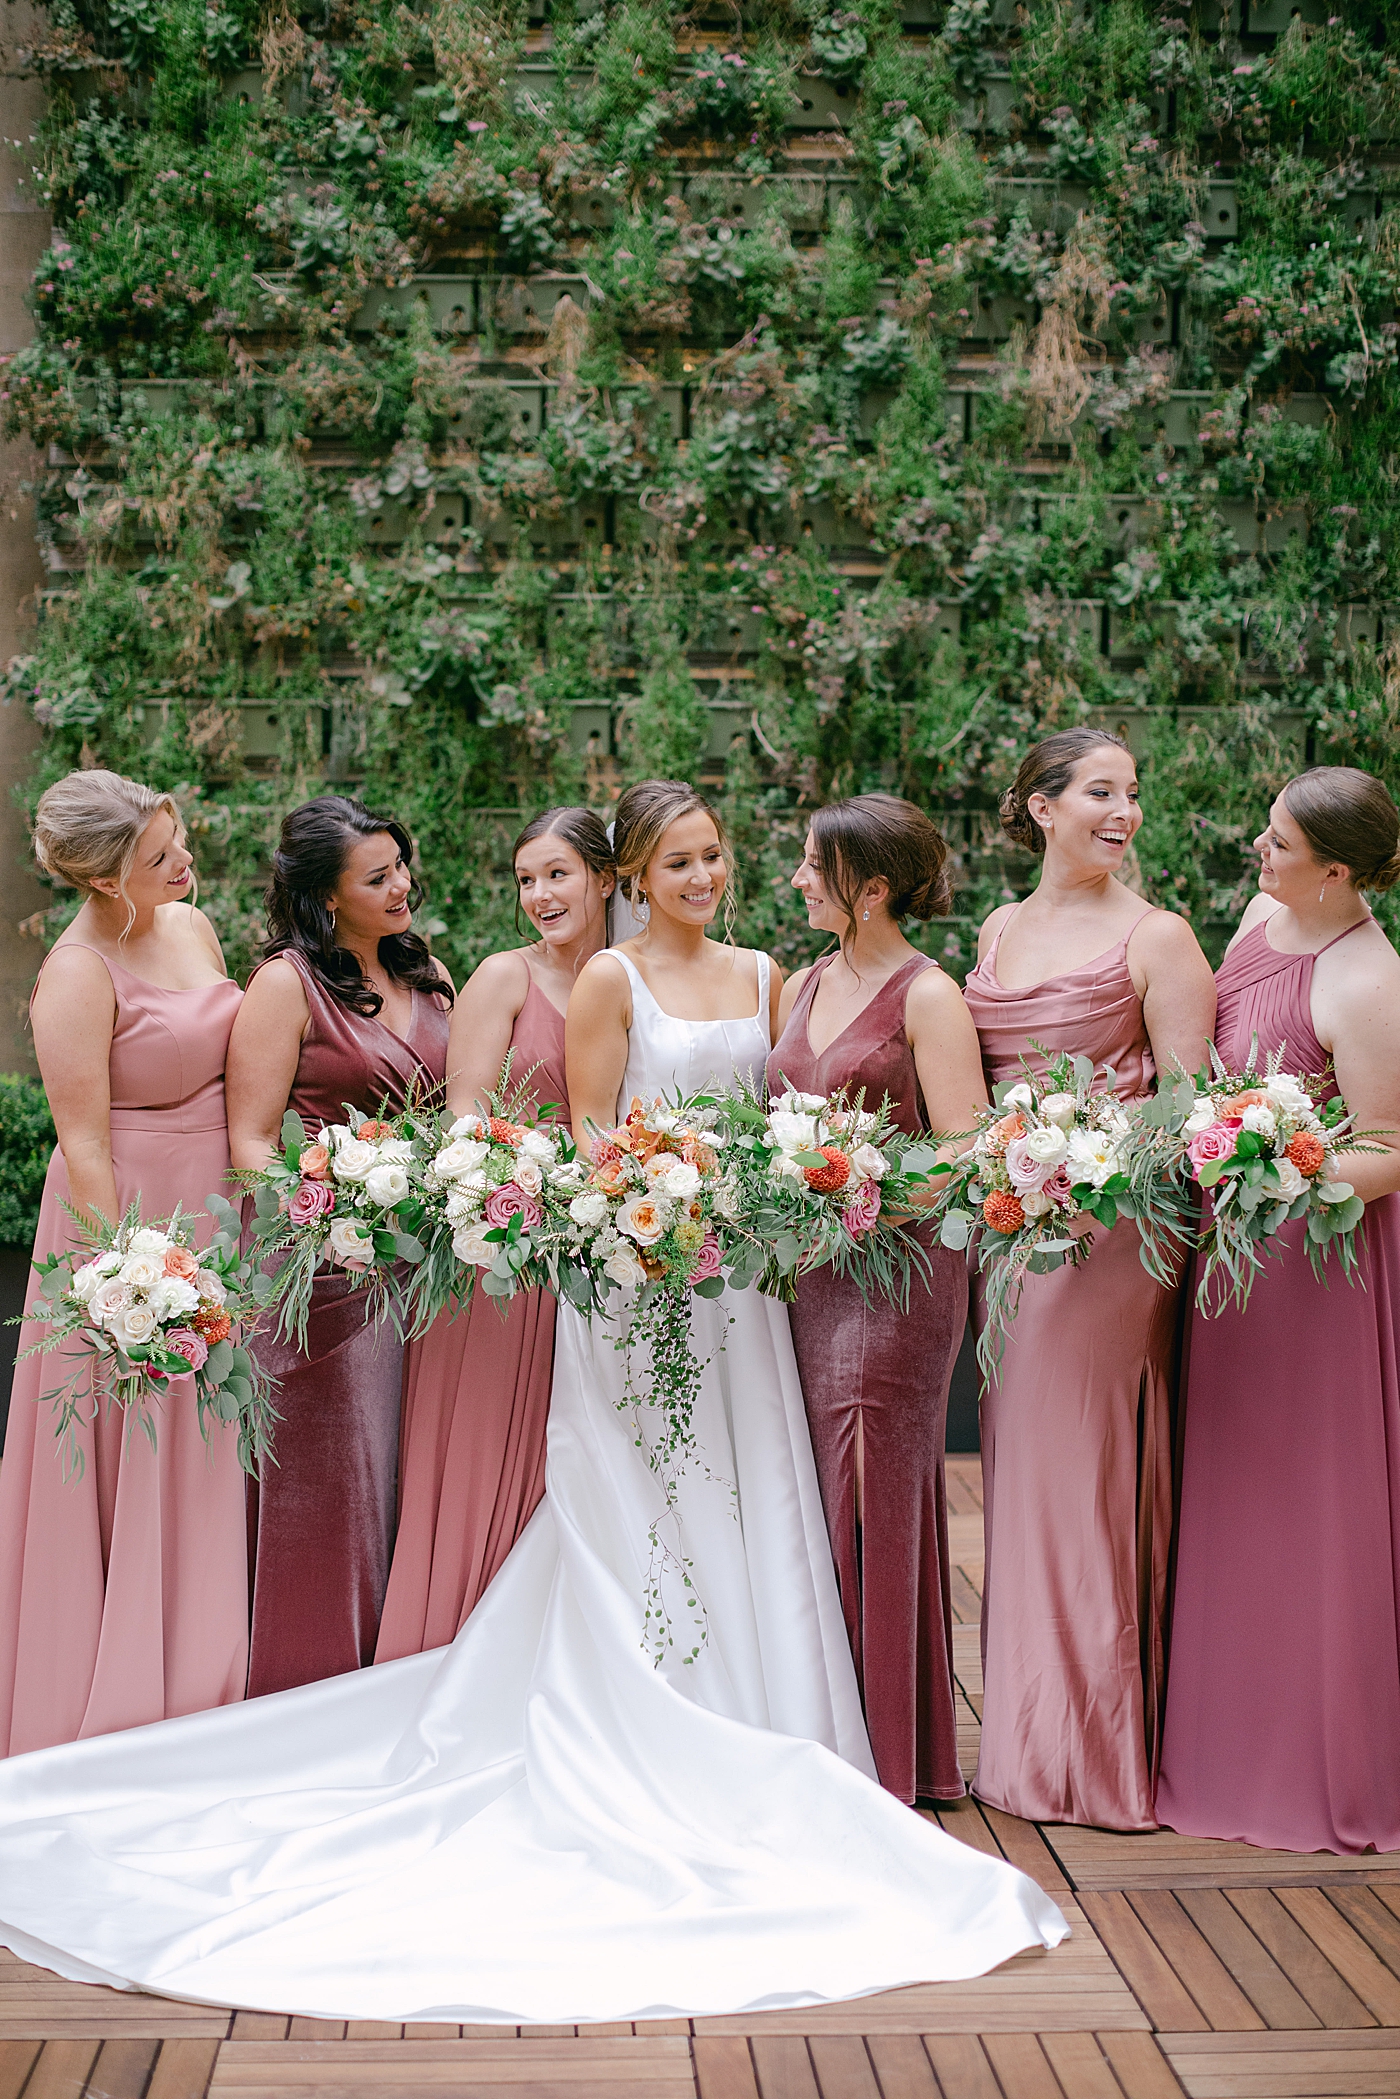 Bride with her bridesmaids holding their florals | Photo by Hope Helmuth Photography